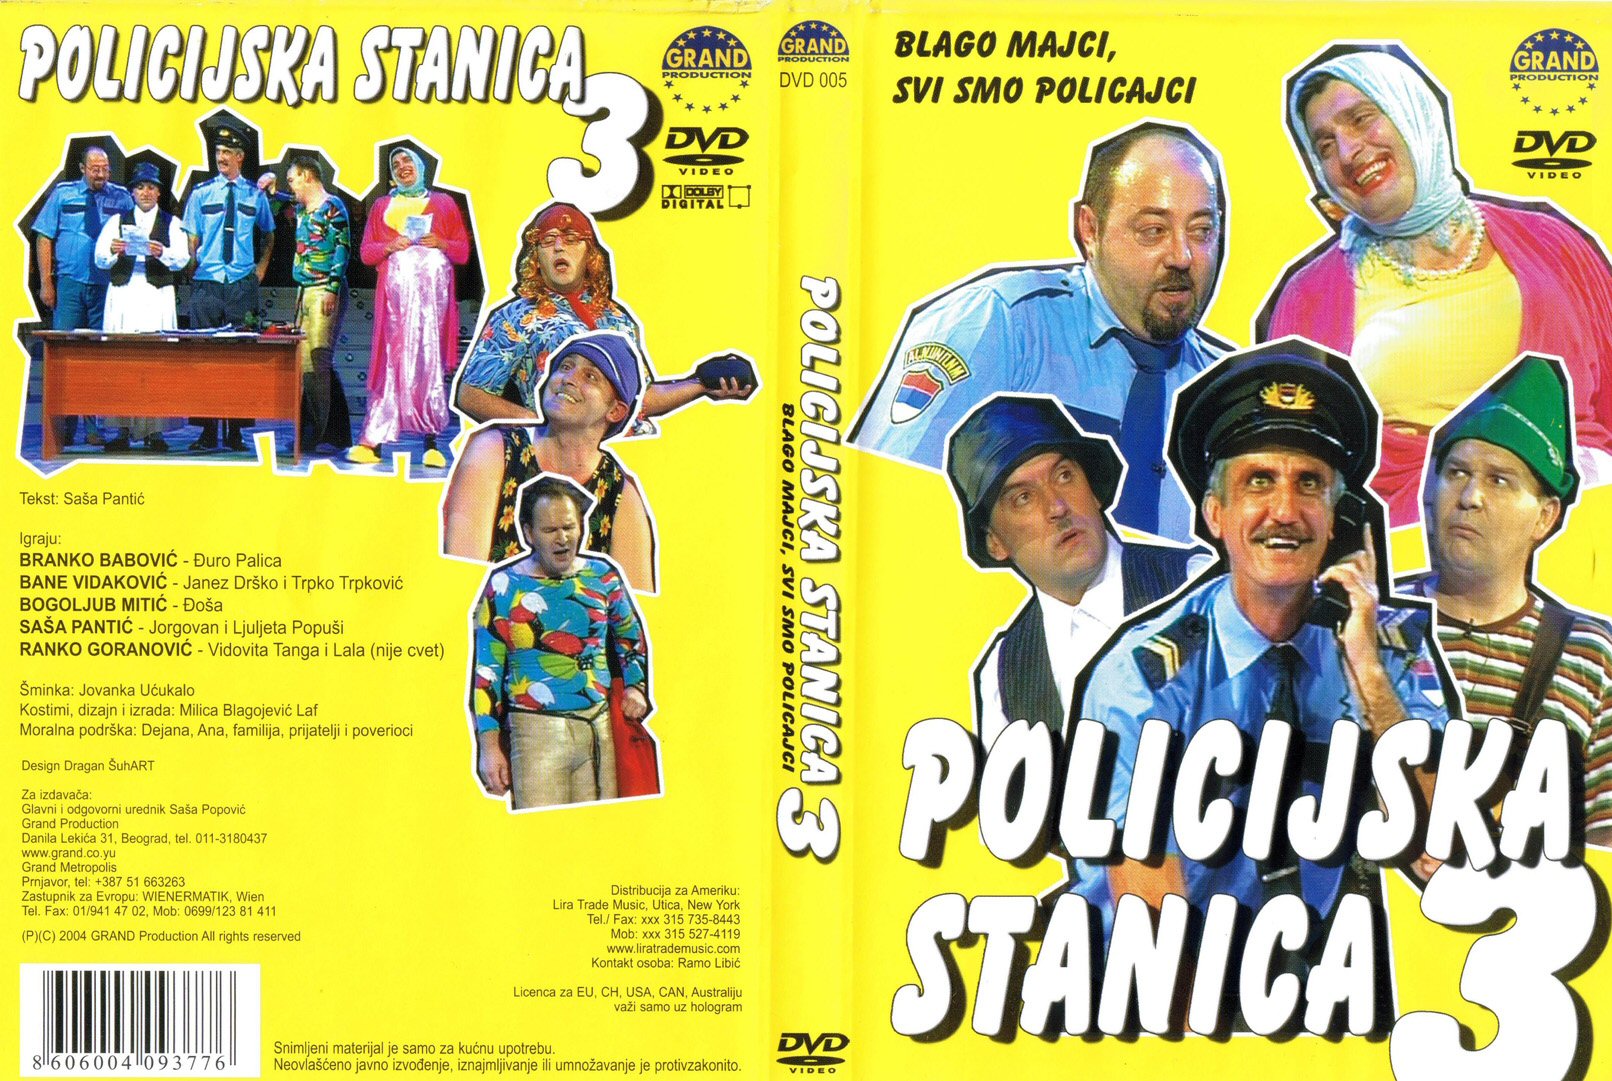 Click to view full size image -  DVD Cover - P - policijska_stanica_3_dvd - policijska_stanica_3_dvd.jpg